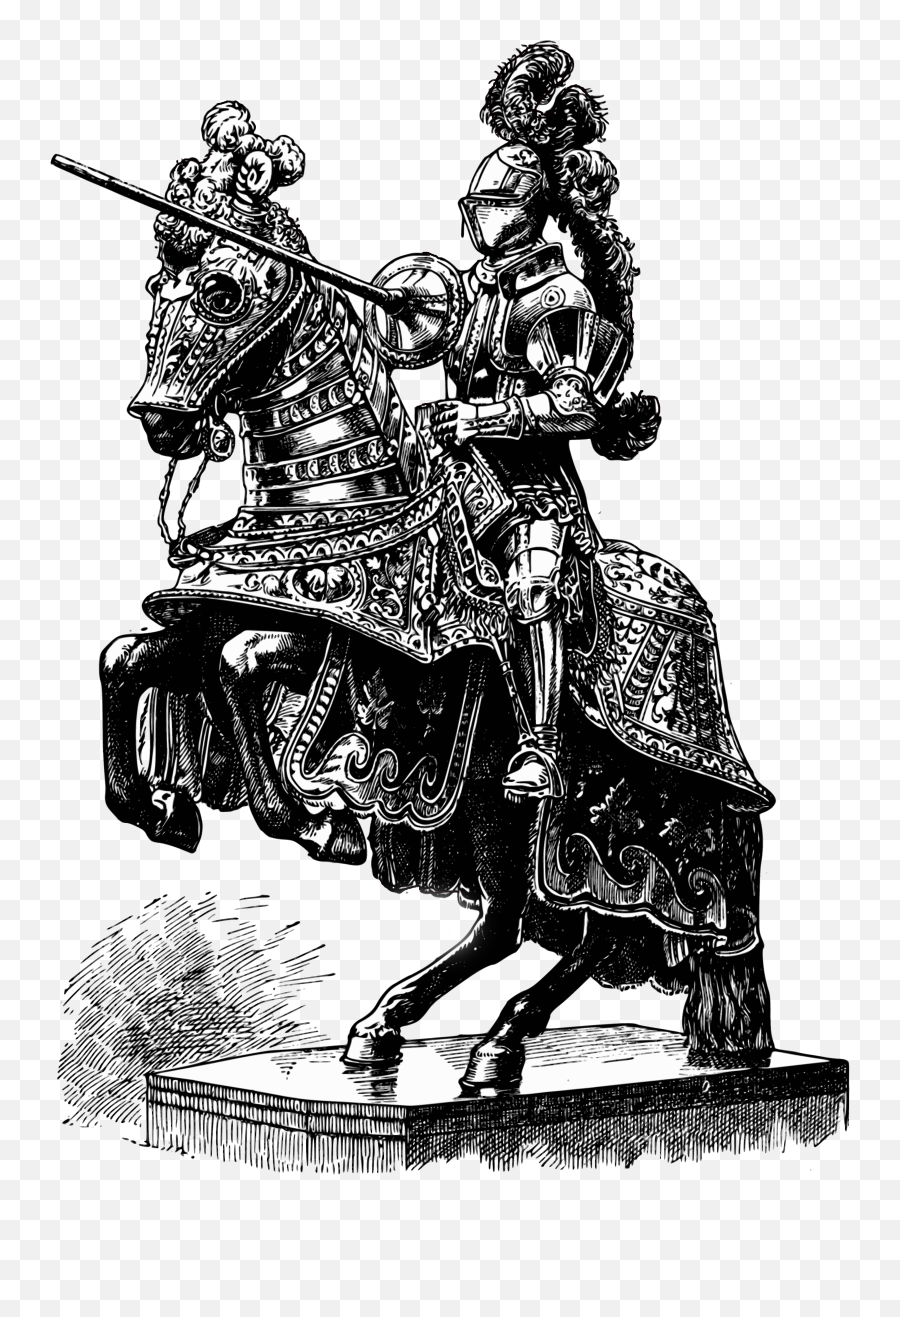 Black And White Drawing Of The Medieval Knight - Knights Jousting On Horses Drawing Emoji,Knight Of Emotions